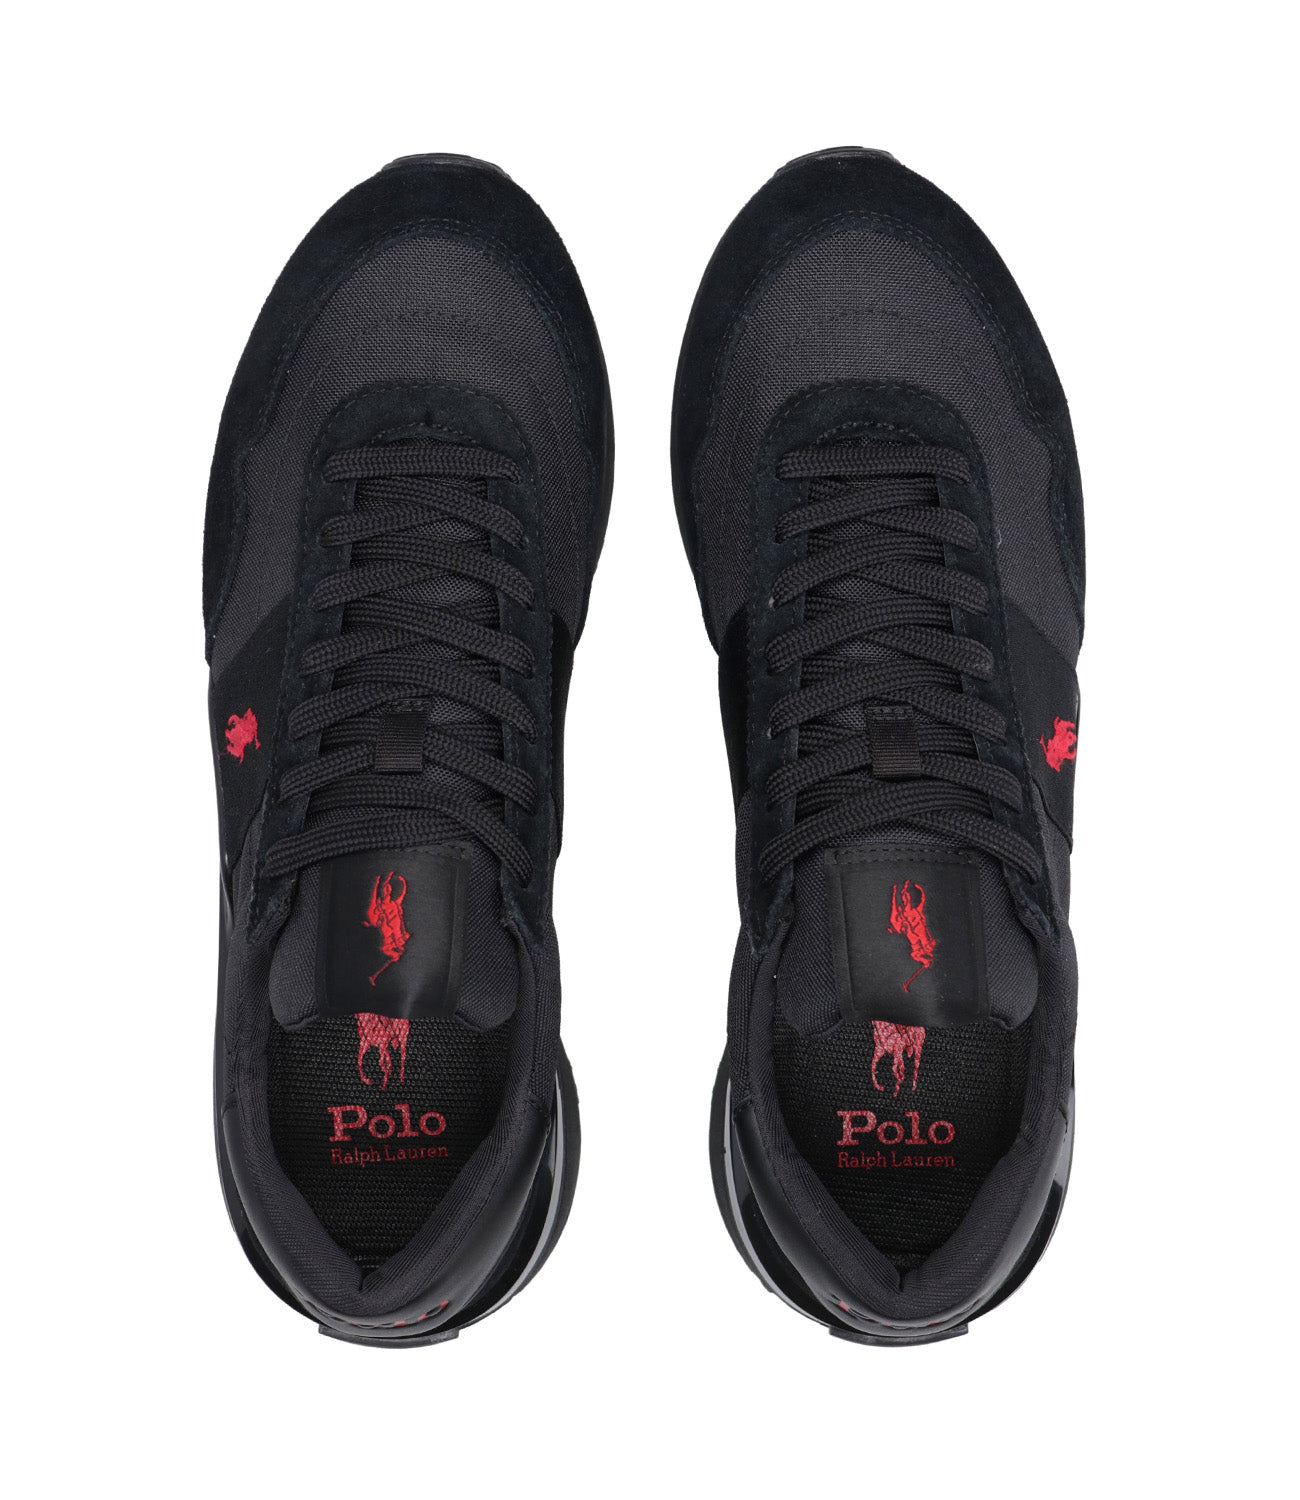 Polo Ralph Lauren | Train 89 Black and Red Sneakers